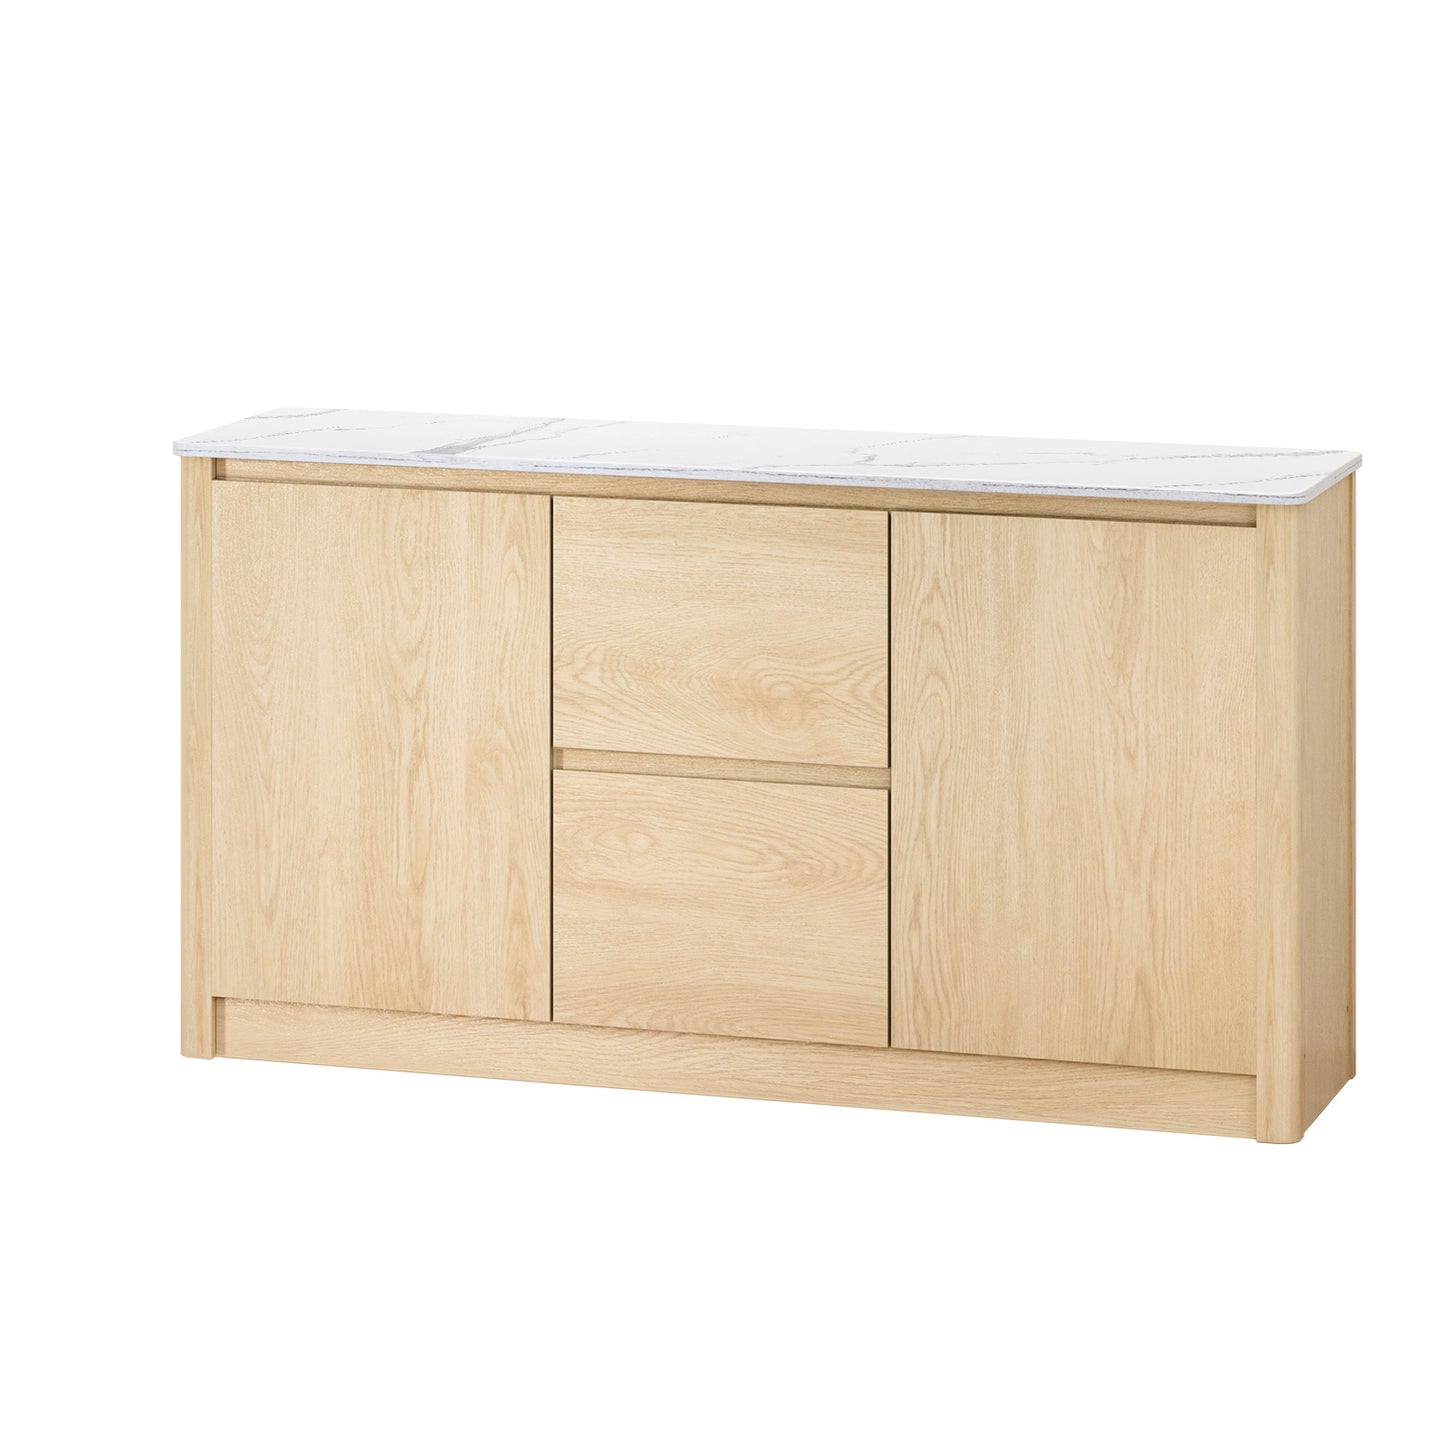 Todd Wooden Buffet Sideboard Marble Style Tabletop - Pine